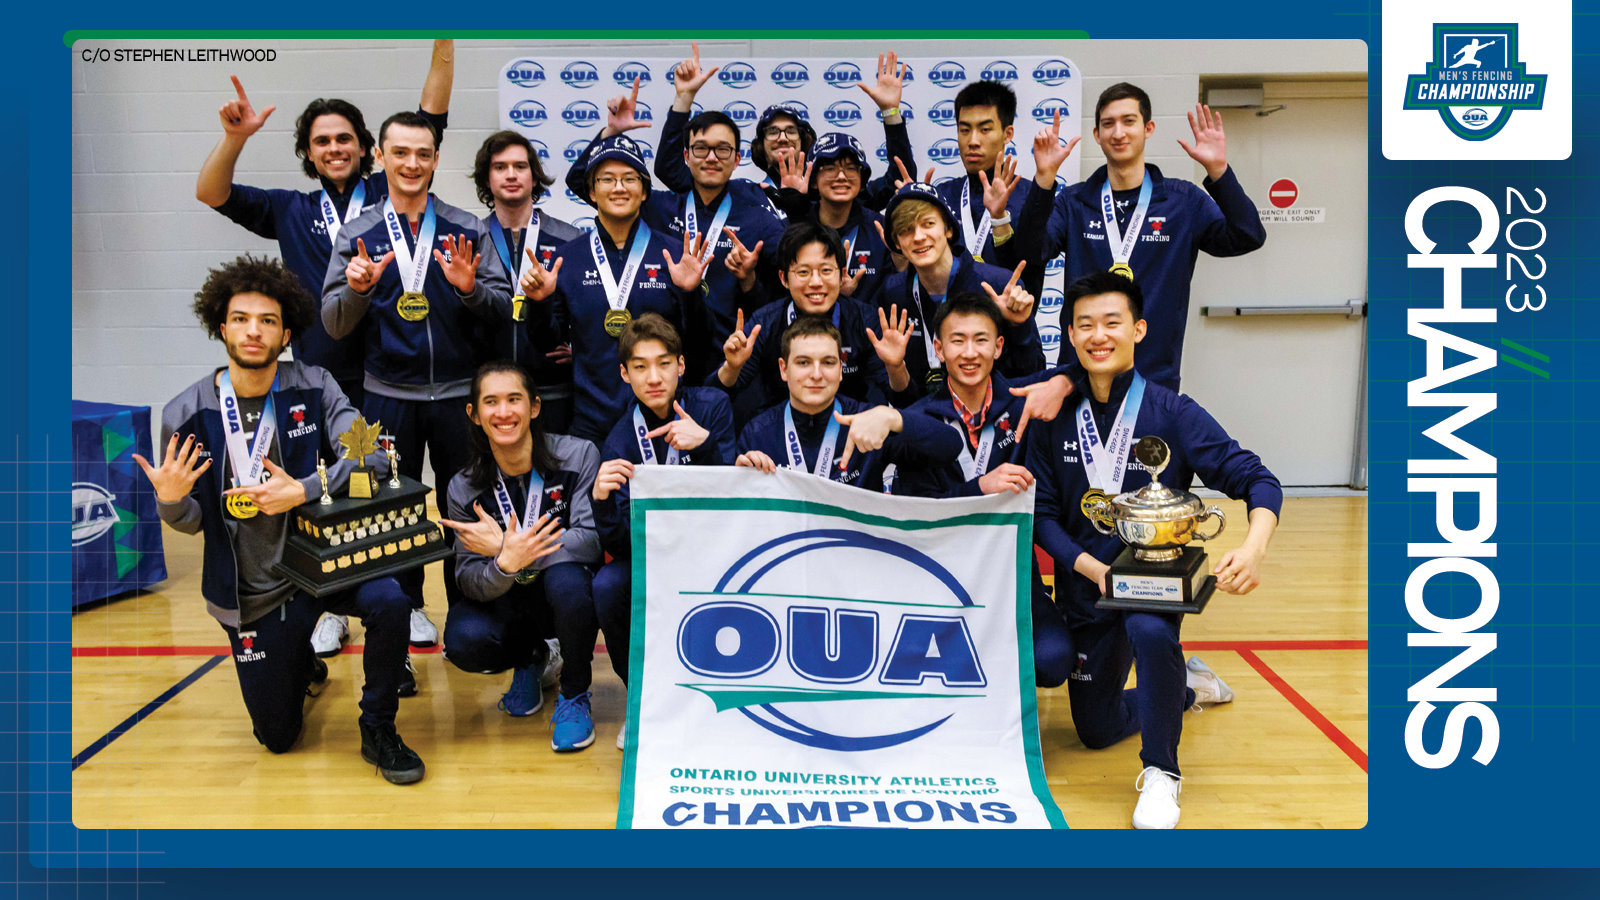 Predominantly blue graphic covered mostly by 2023 OUA Men's Fencing Championship banner photo, with the corresponding championship logo and white text reading '2023 Champions' on the right side